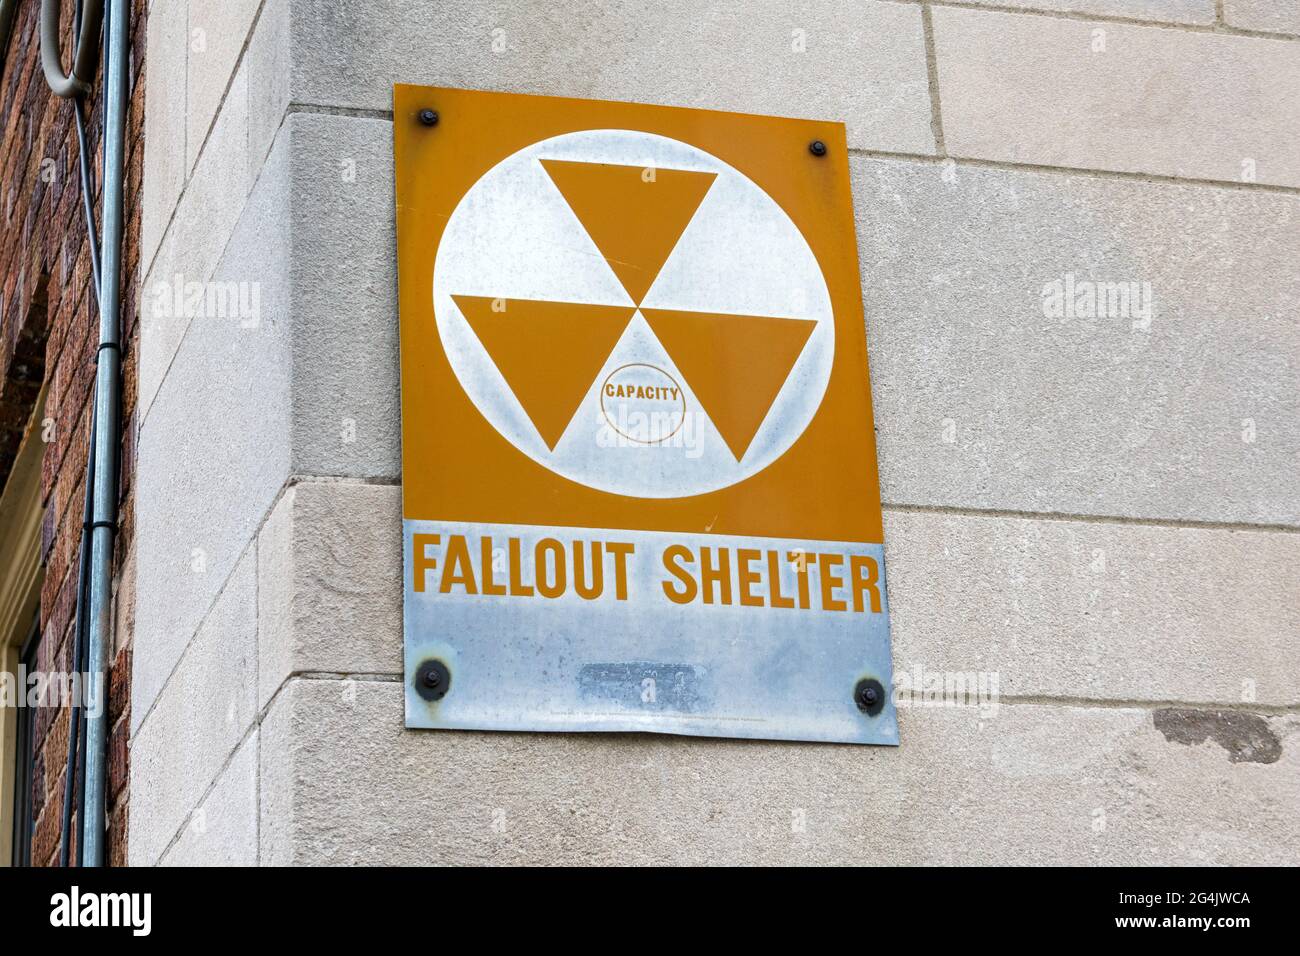 Fallout Shelter sign informs about nearby enclosed space specially designated to protect occupants from radioactive debris or fallout resulting from a Stock Photo